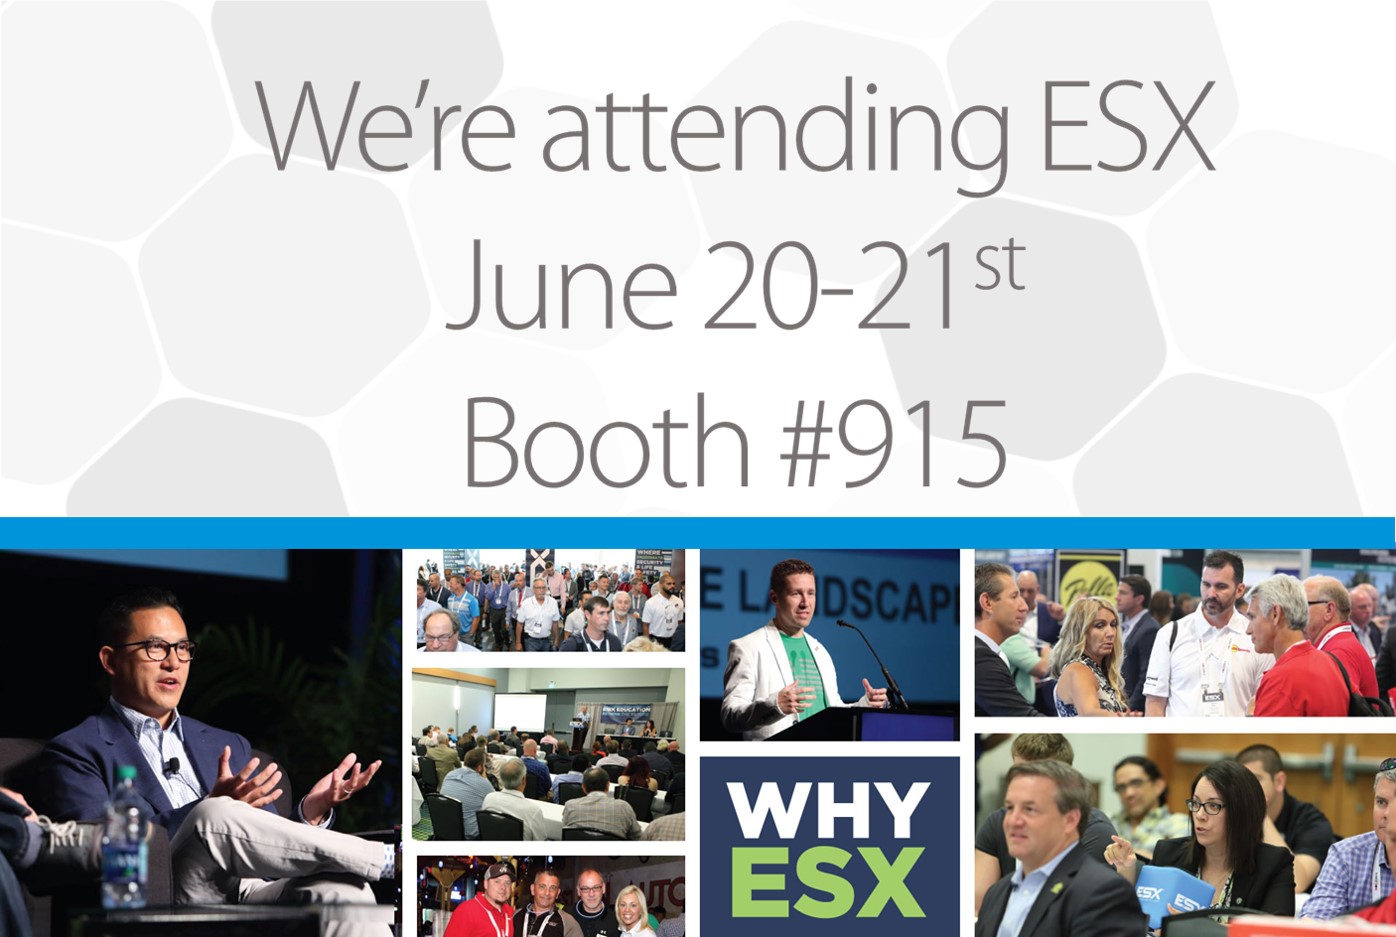 We'll Be Attending ESX!